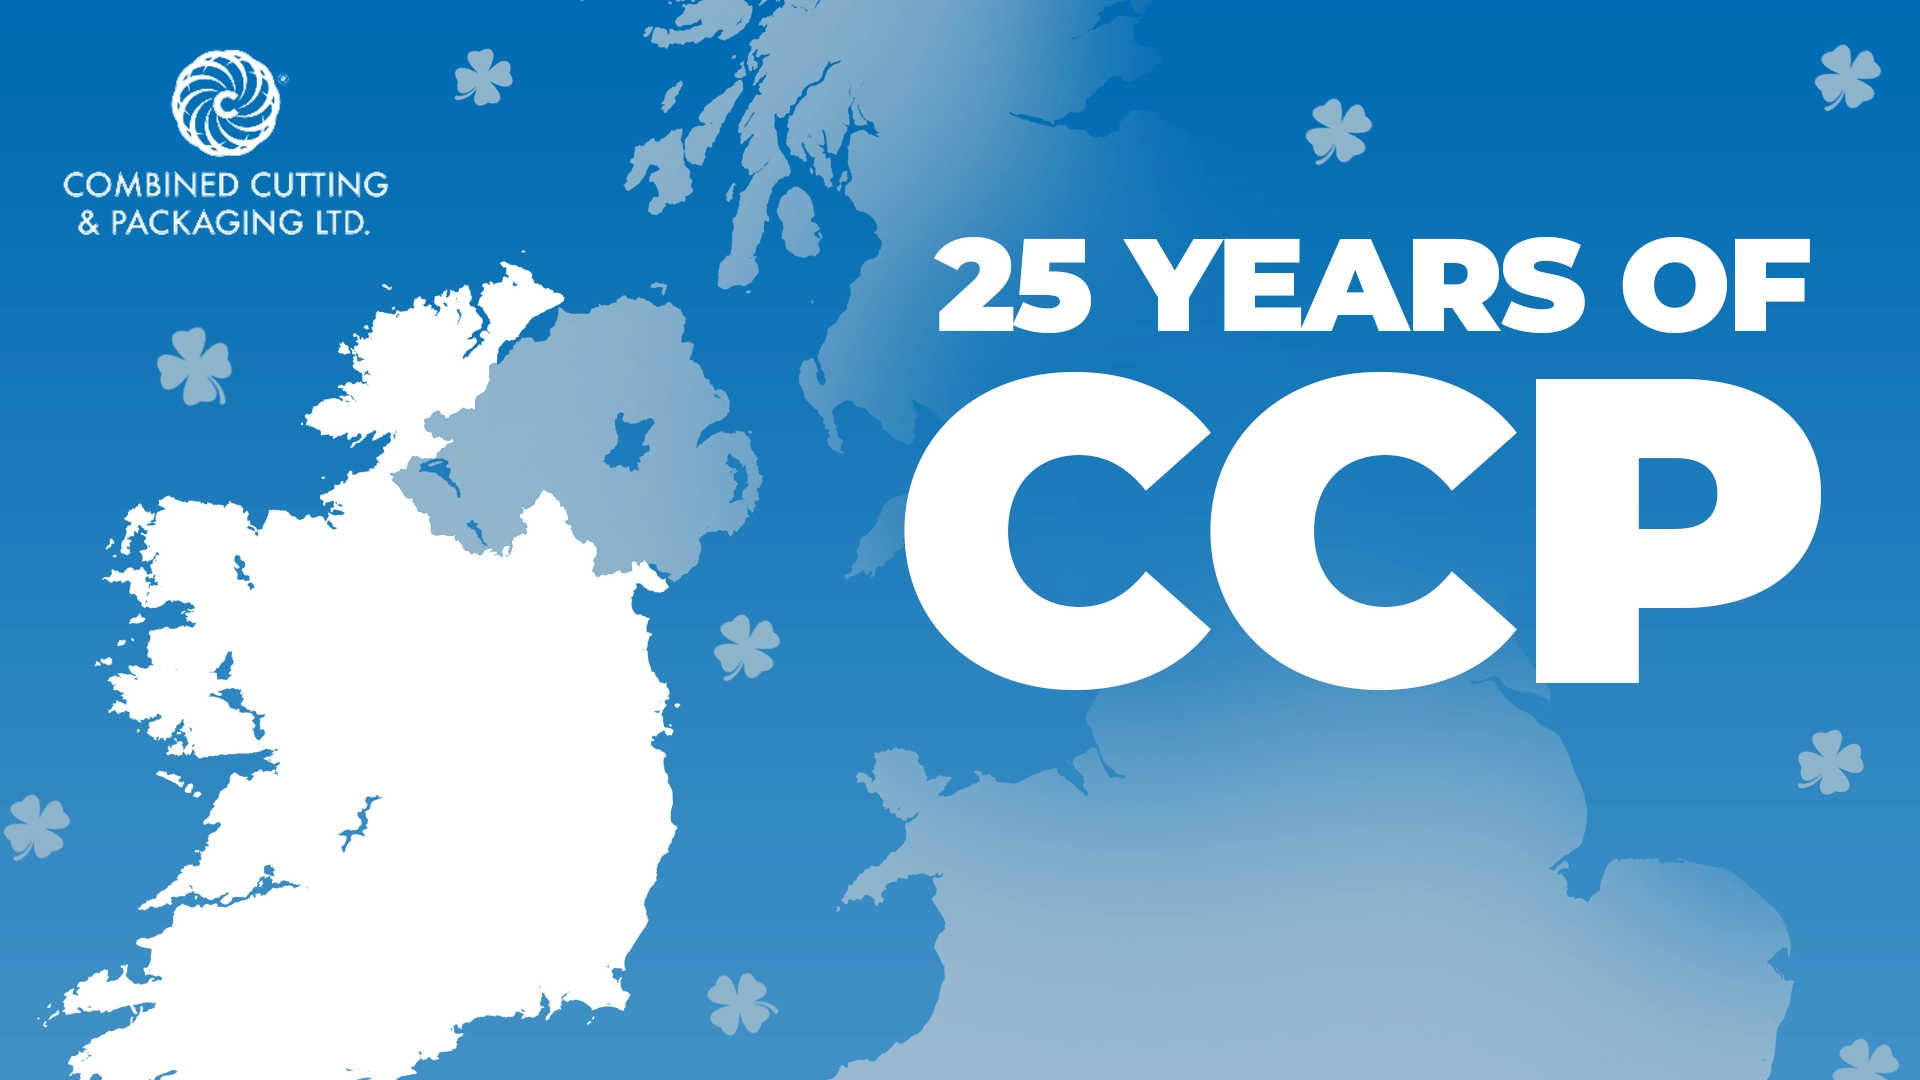 Introducing CCP: Our Sole Distributor for Ireland